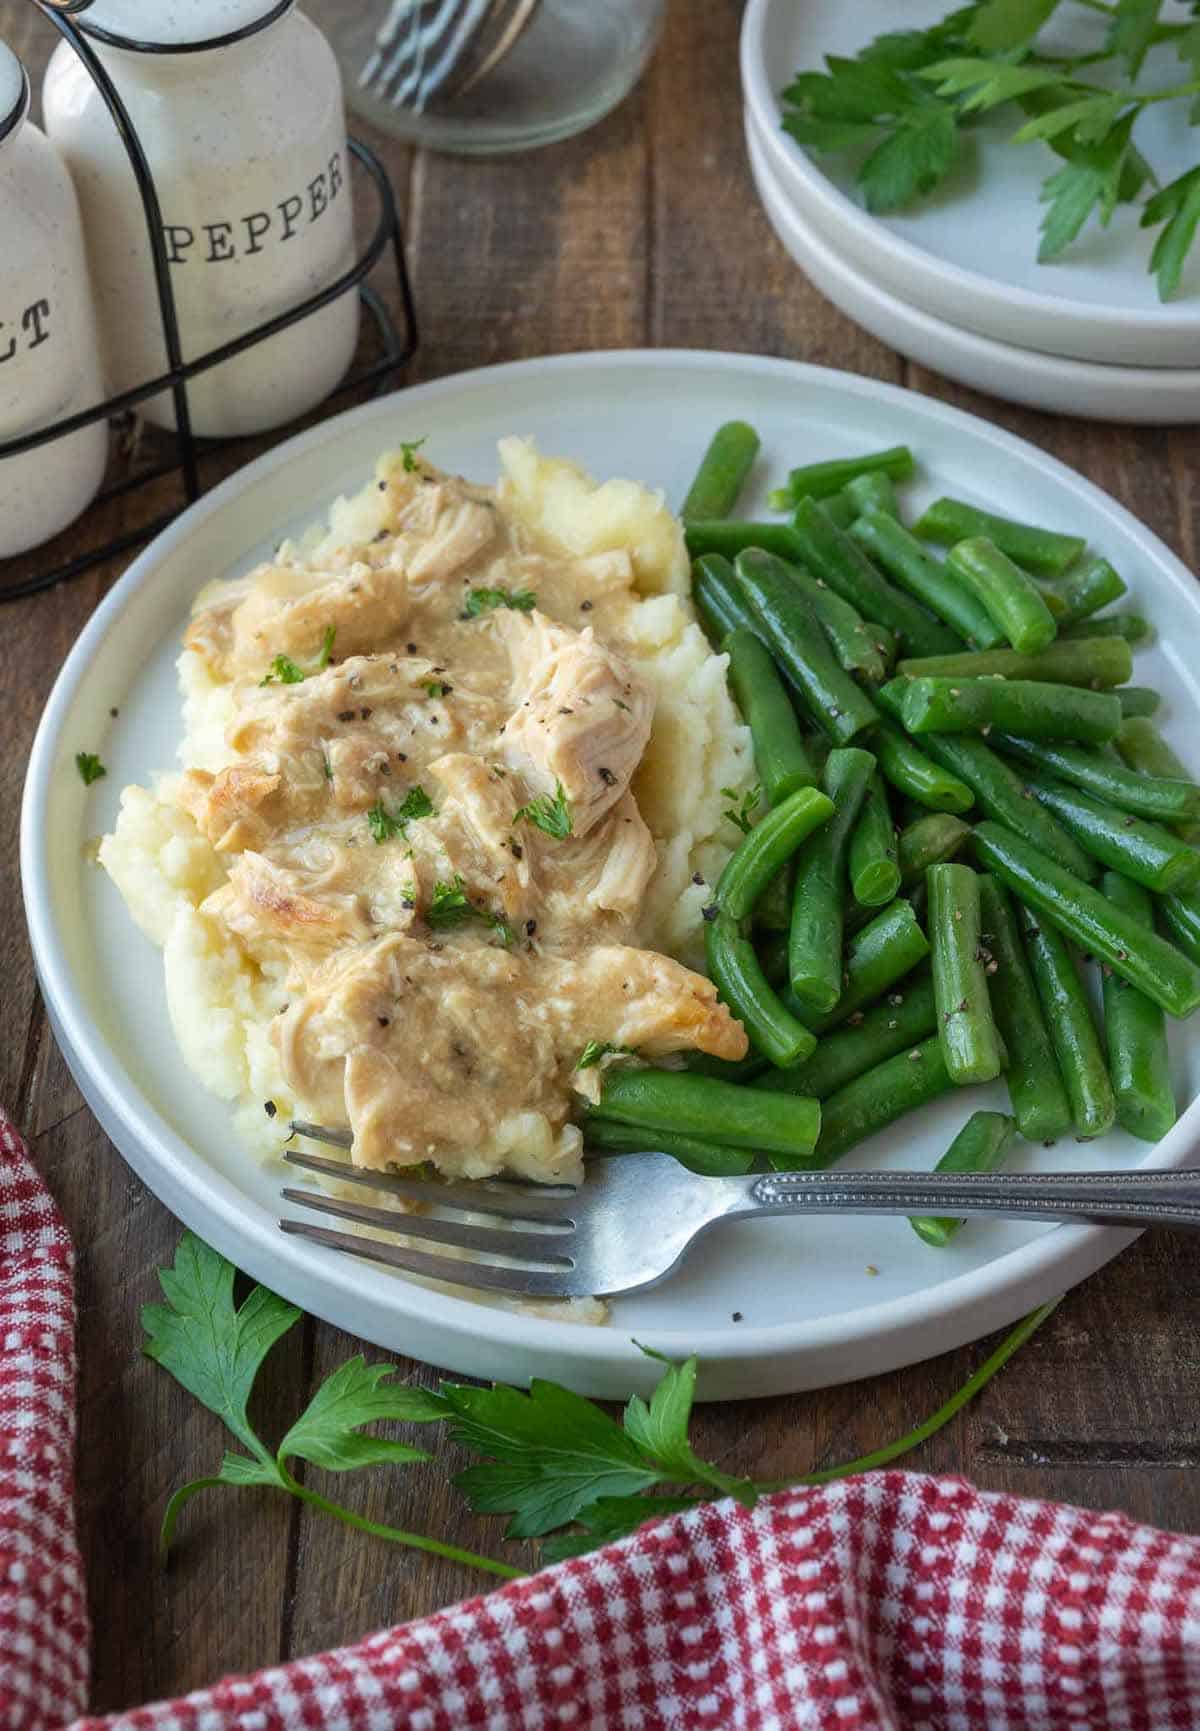 Shredded chicken and gravy on top of mashed potatoes with green beans.